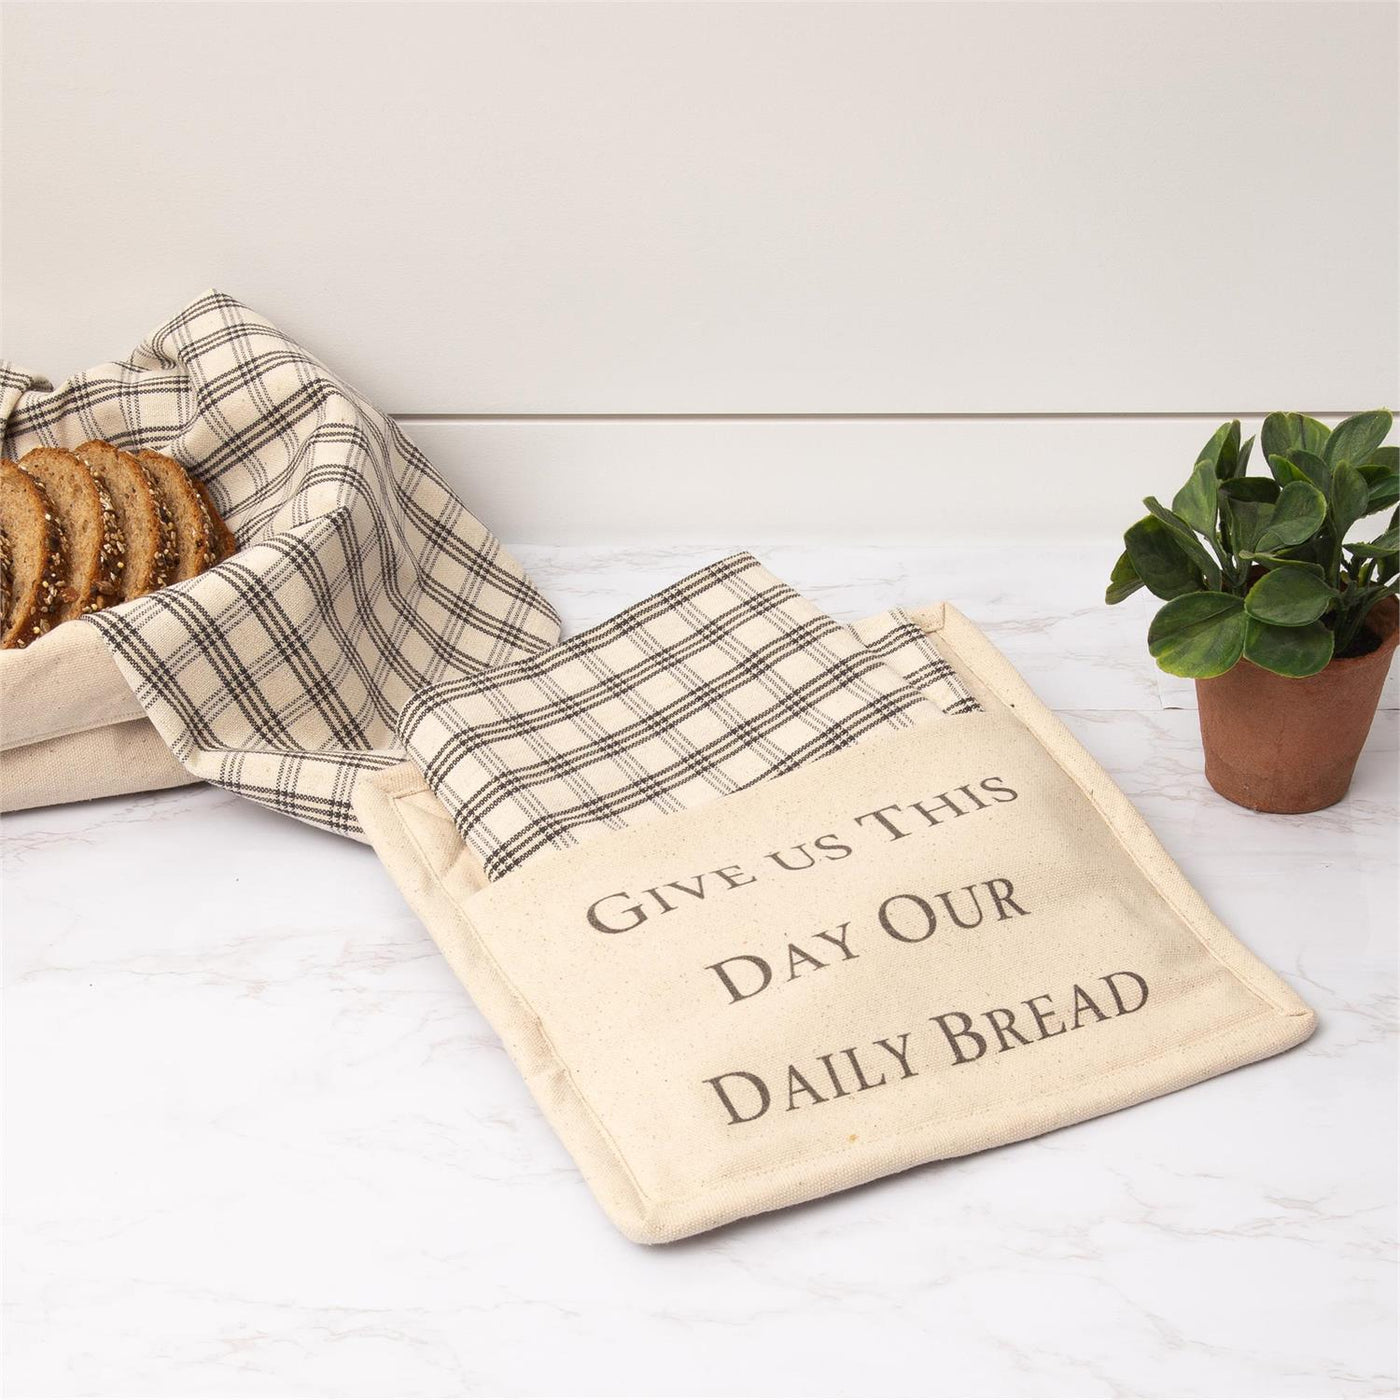 Give Us This Day Our Daily Bread Pot Holder and Tea Towel